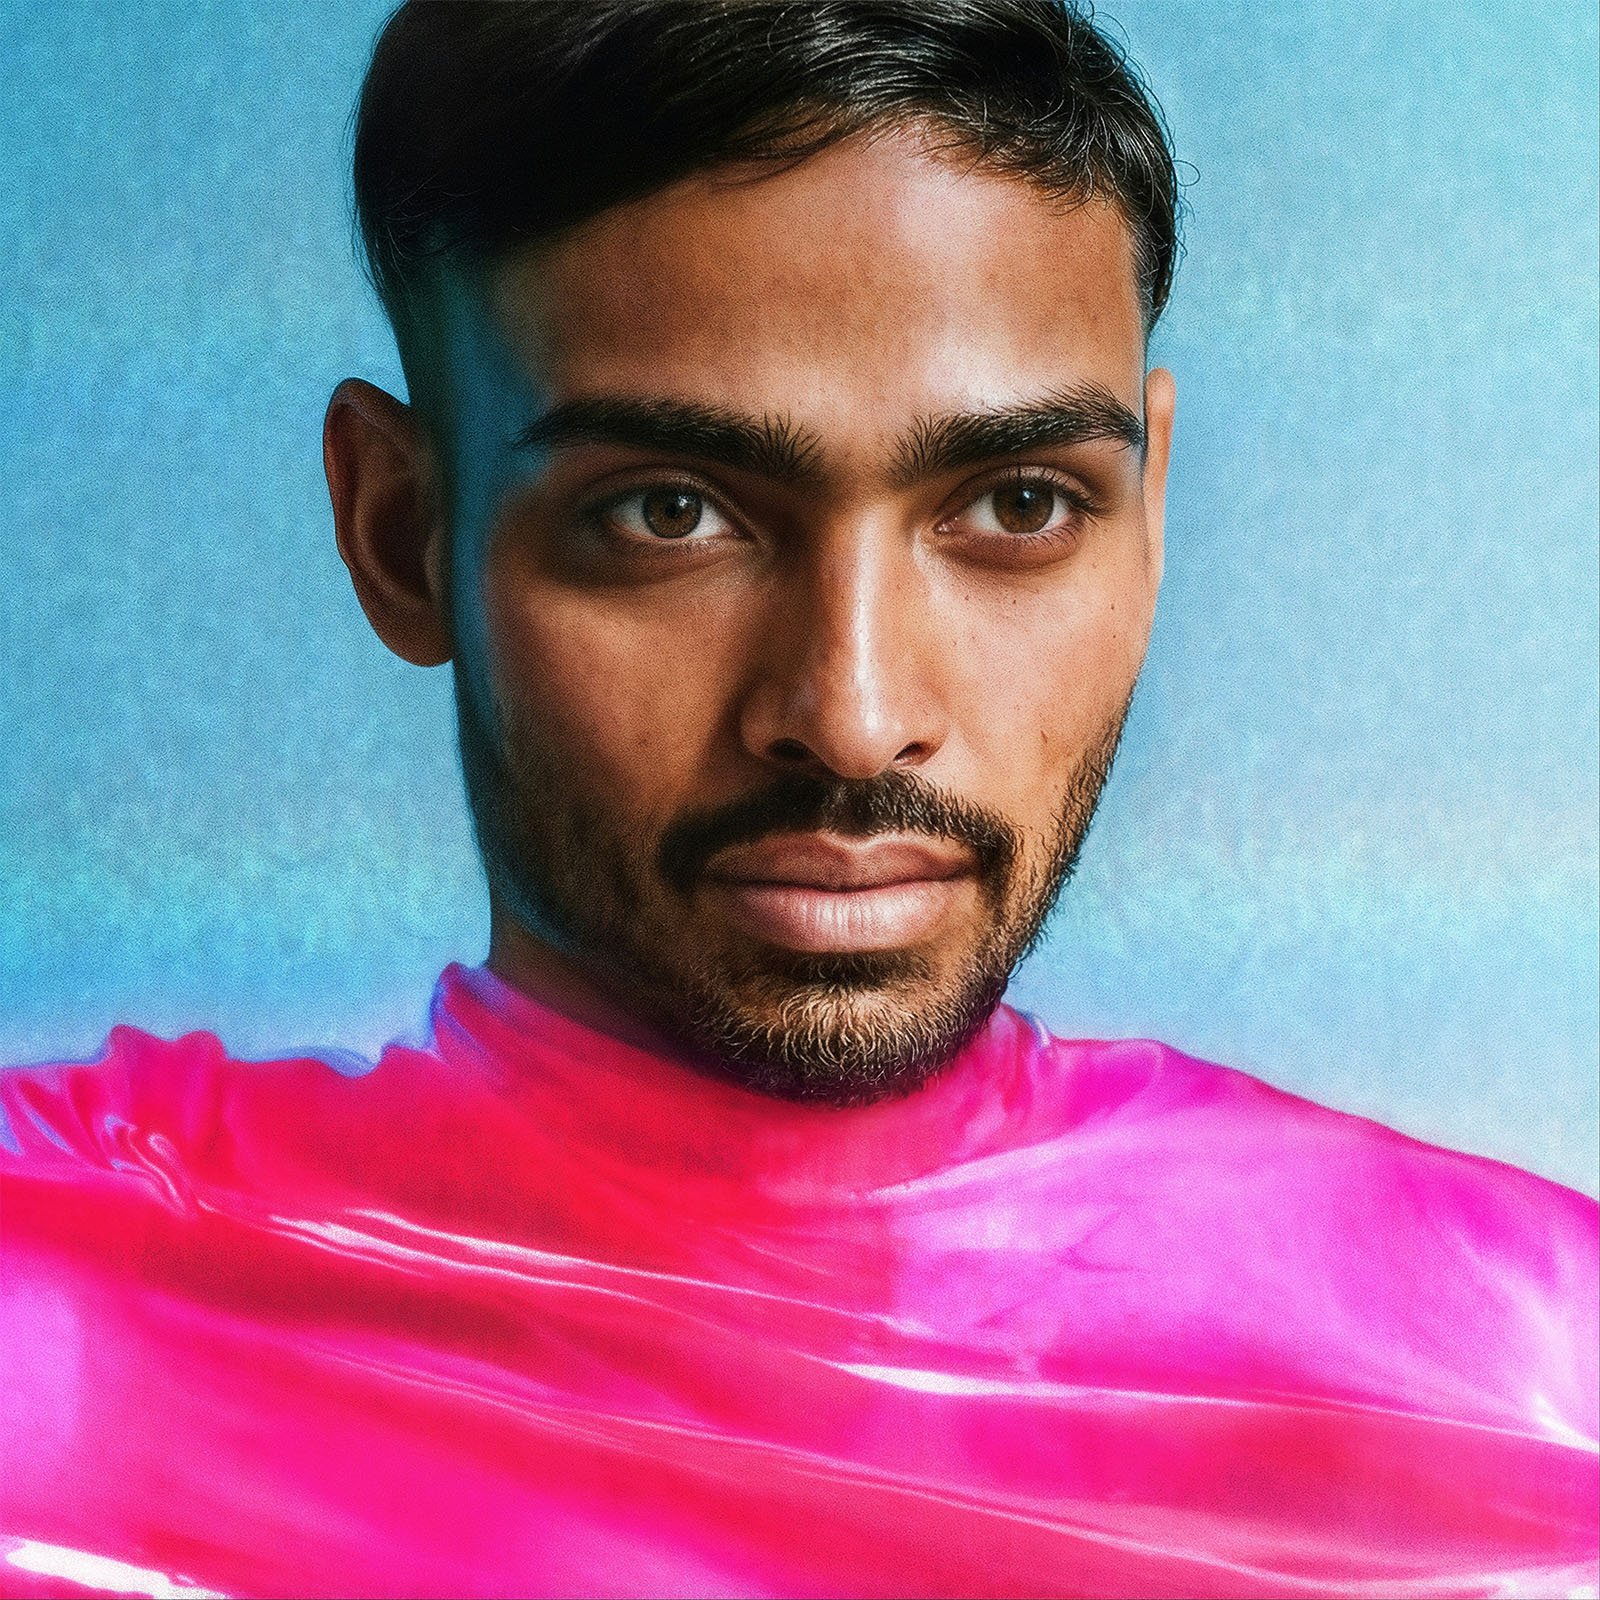 Portrait of a man with facial hair, looking directly at the camera, wearing a bright pink garment. the background is a soft blue texture.